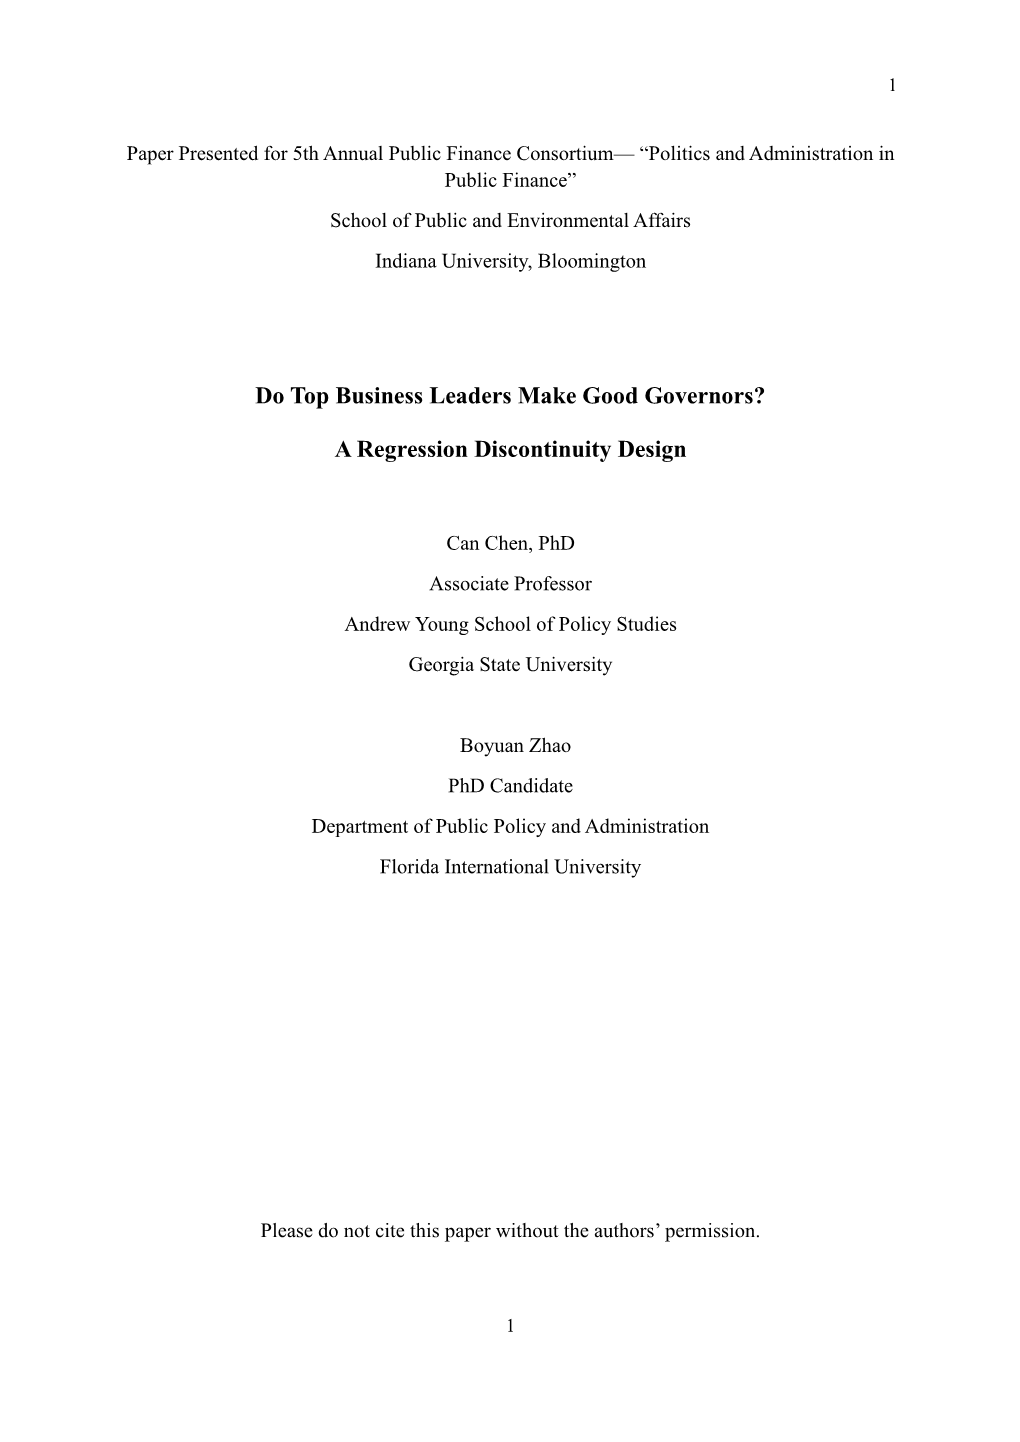 Do Top Business Leaders Make Good Governors? a Regression Discontinuity Design